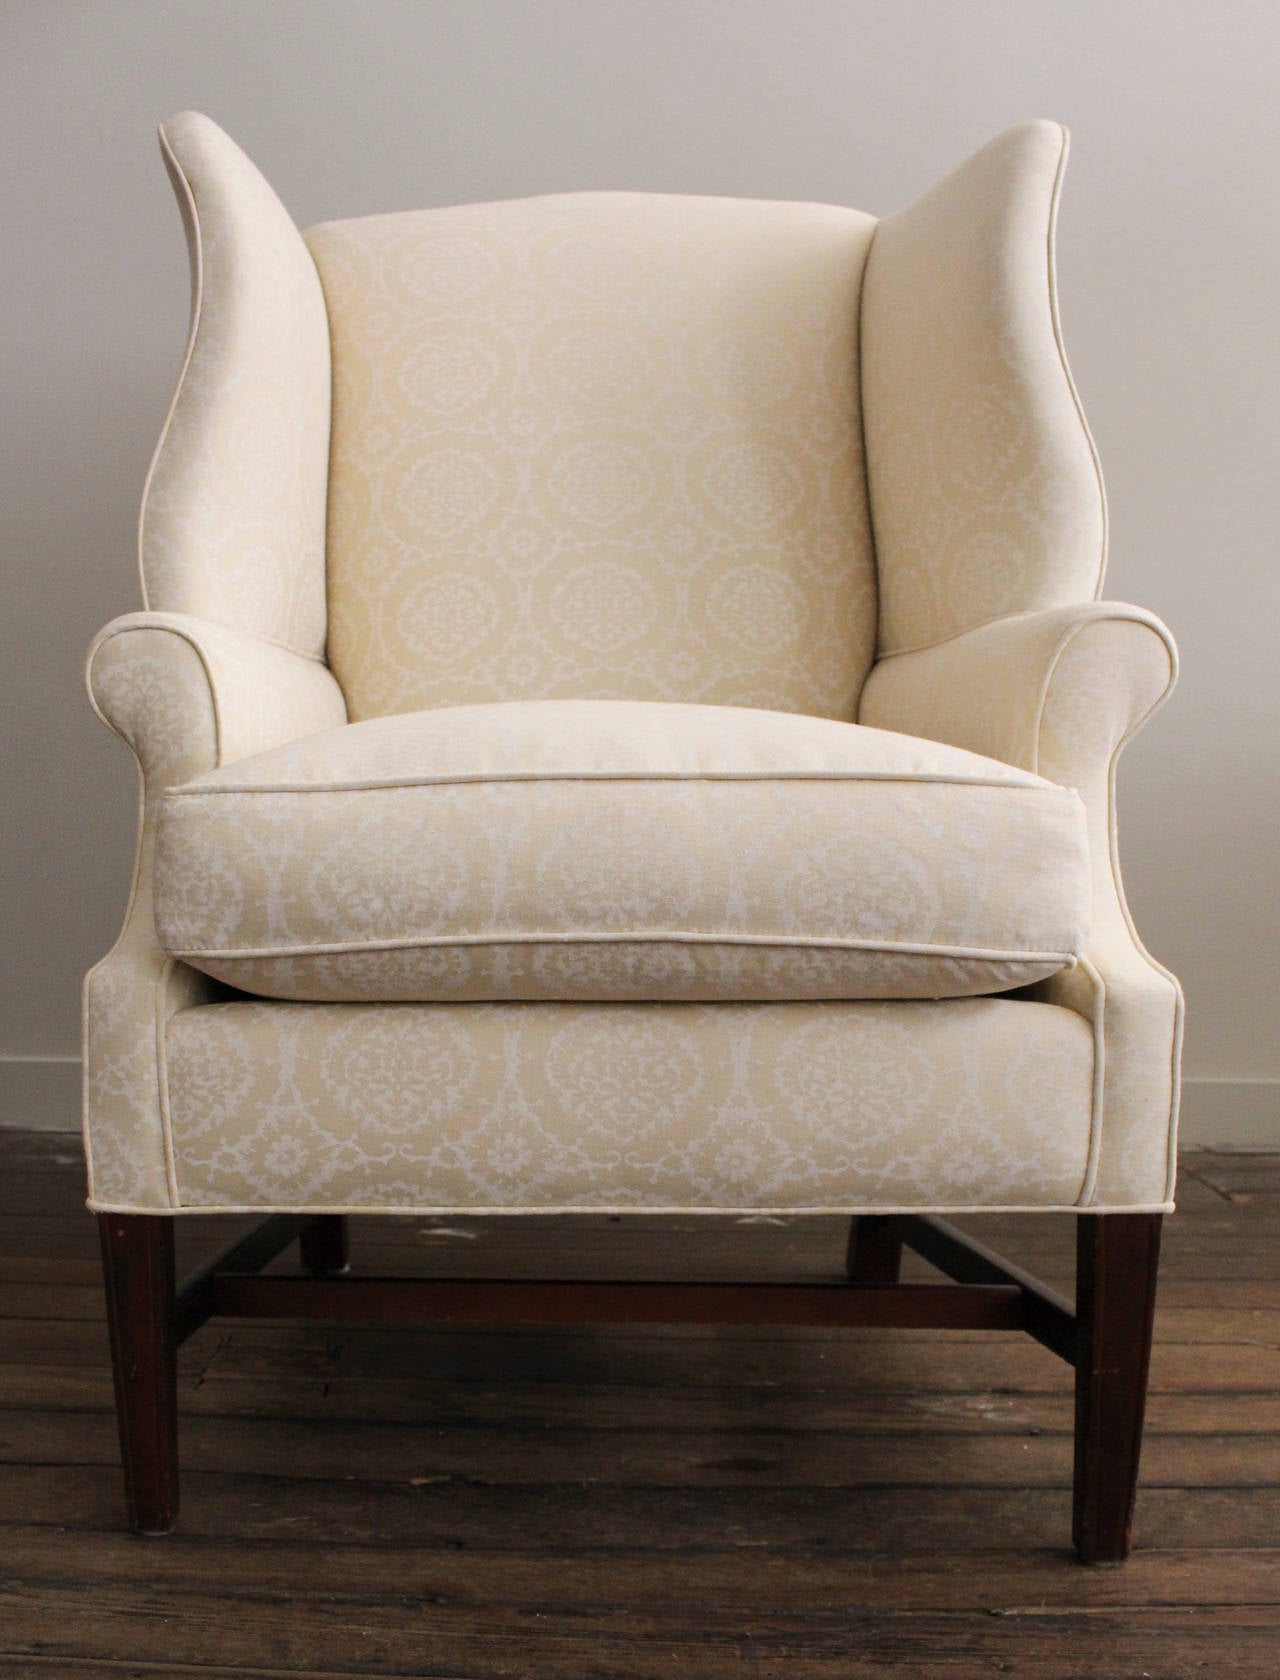 American Vintage 1940s Wingback Chair